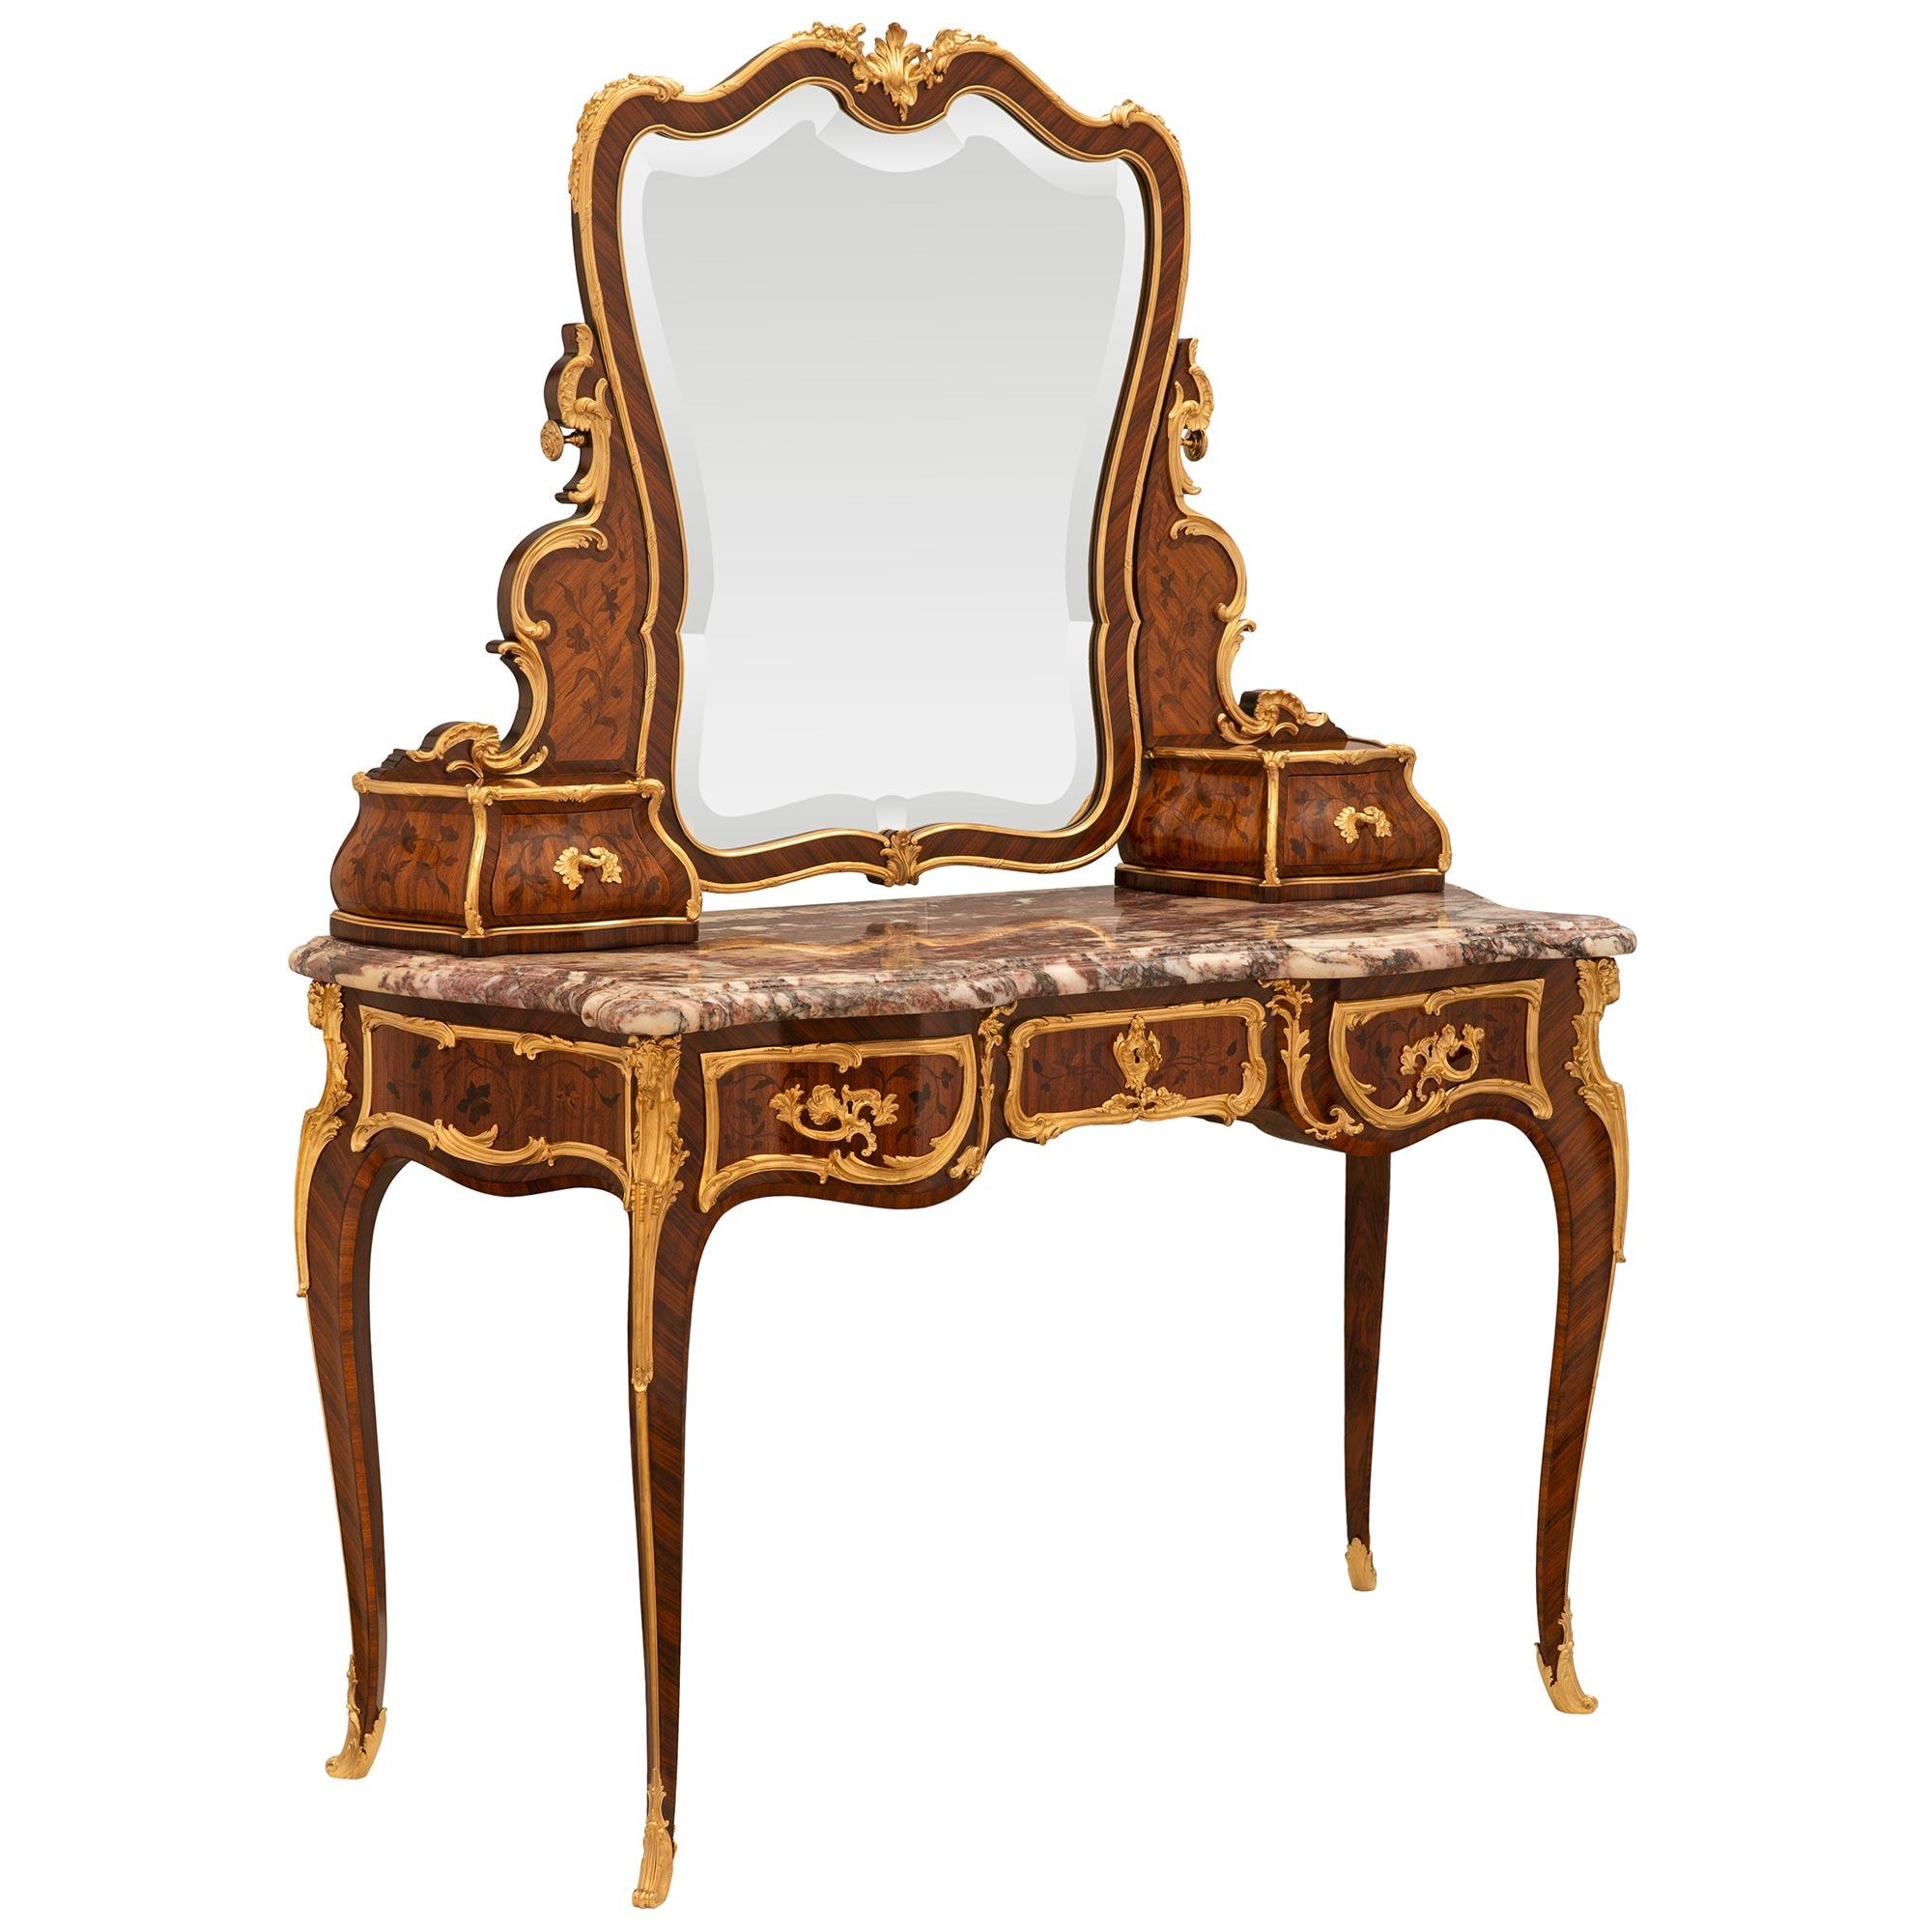 A spectacular and extremely high quality French 19th century Louis XV st. Tulipwood, Kingwood and Ormolu vanity table, attributed to François Linke. The vanity is raised by elegant and slender cabriole legs which are decorated by a top Ormolu mount